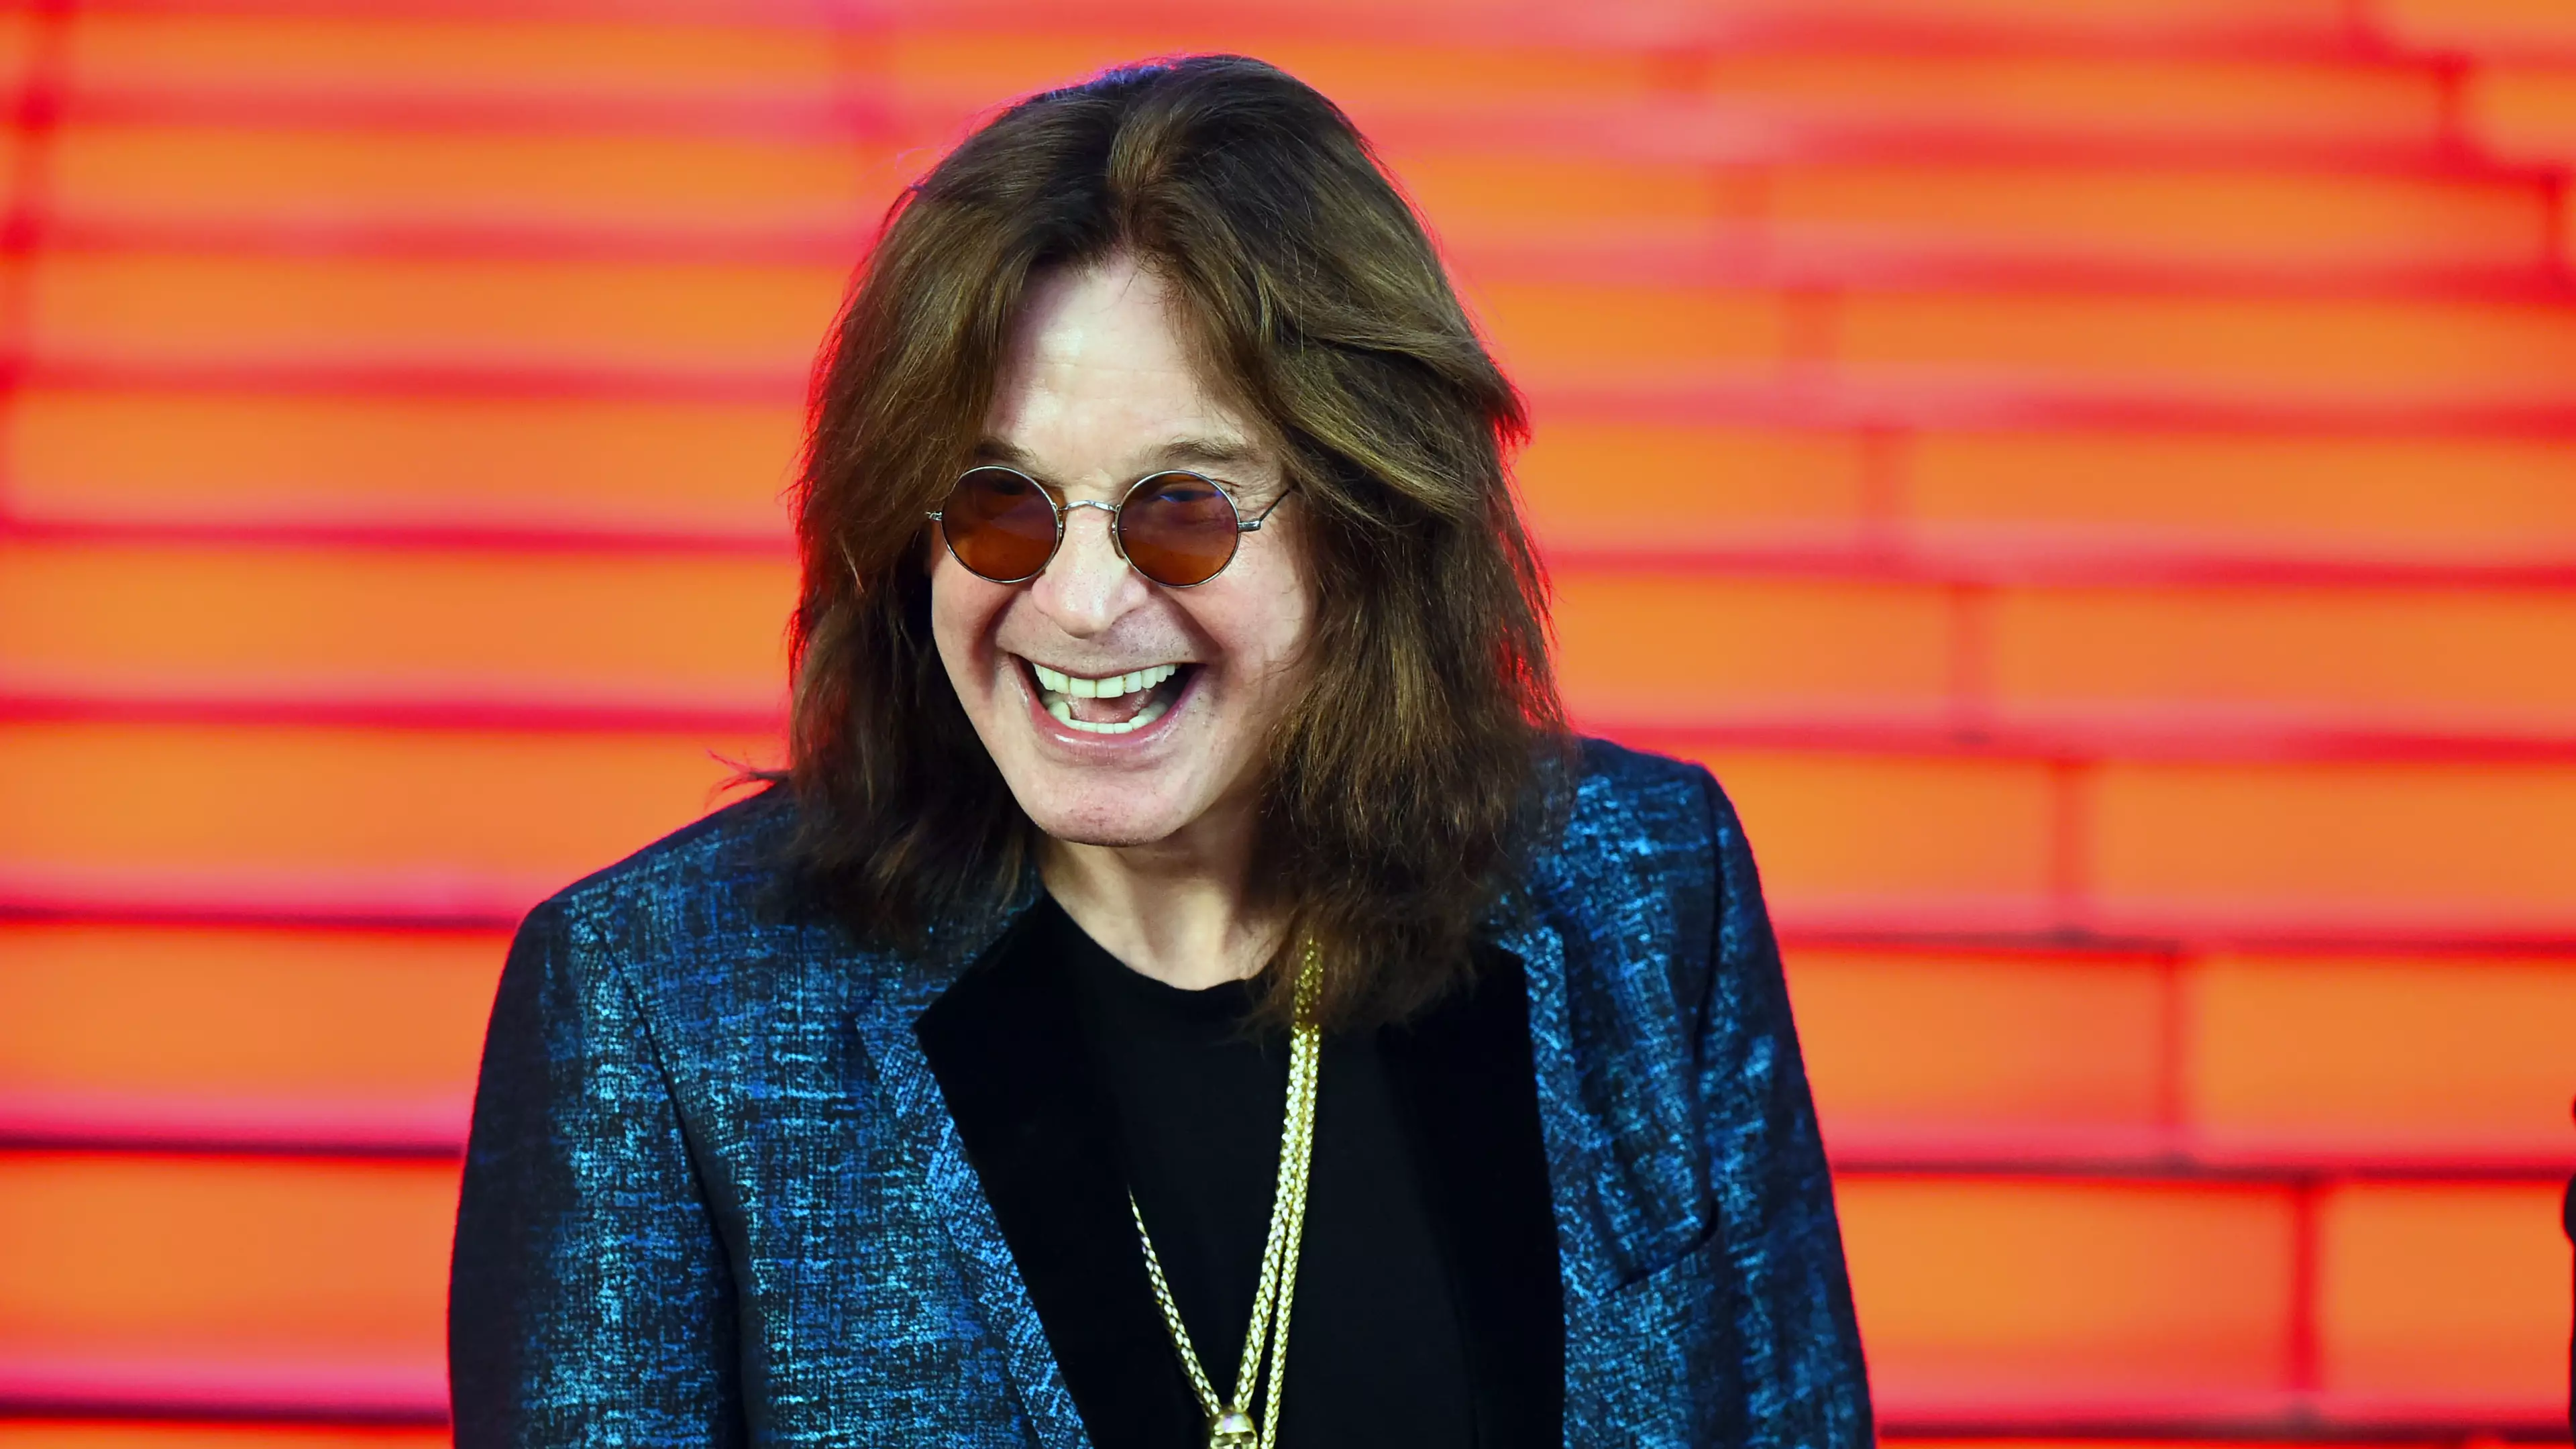 Ozzy Osbourne Says He Shoots Cats That Wander Into His Garden